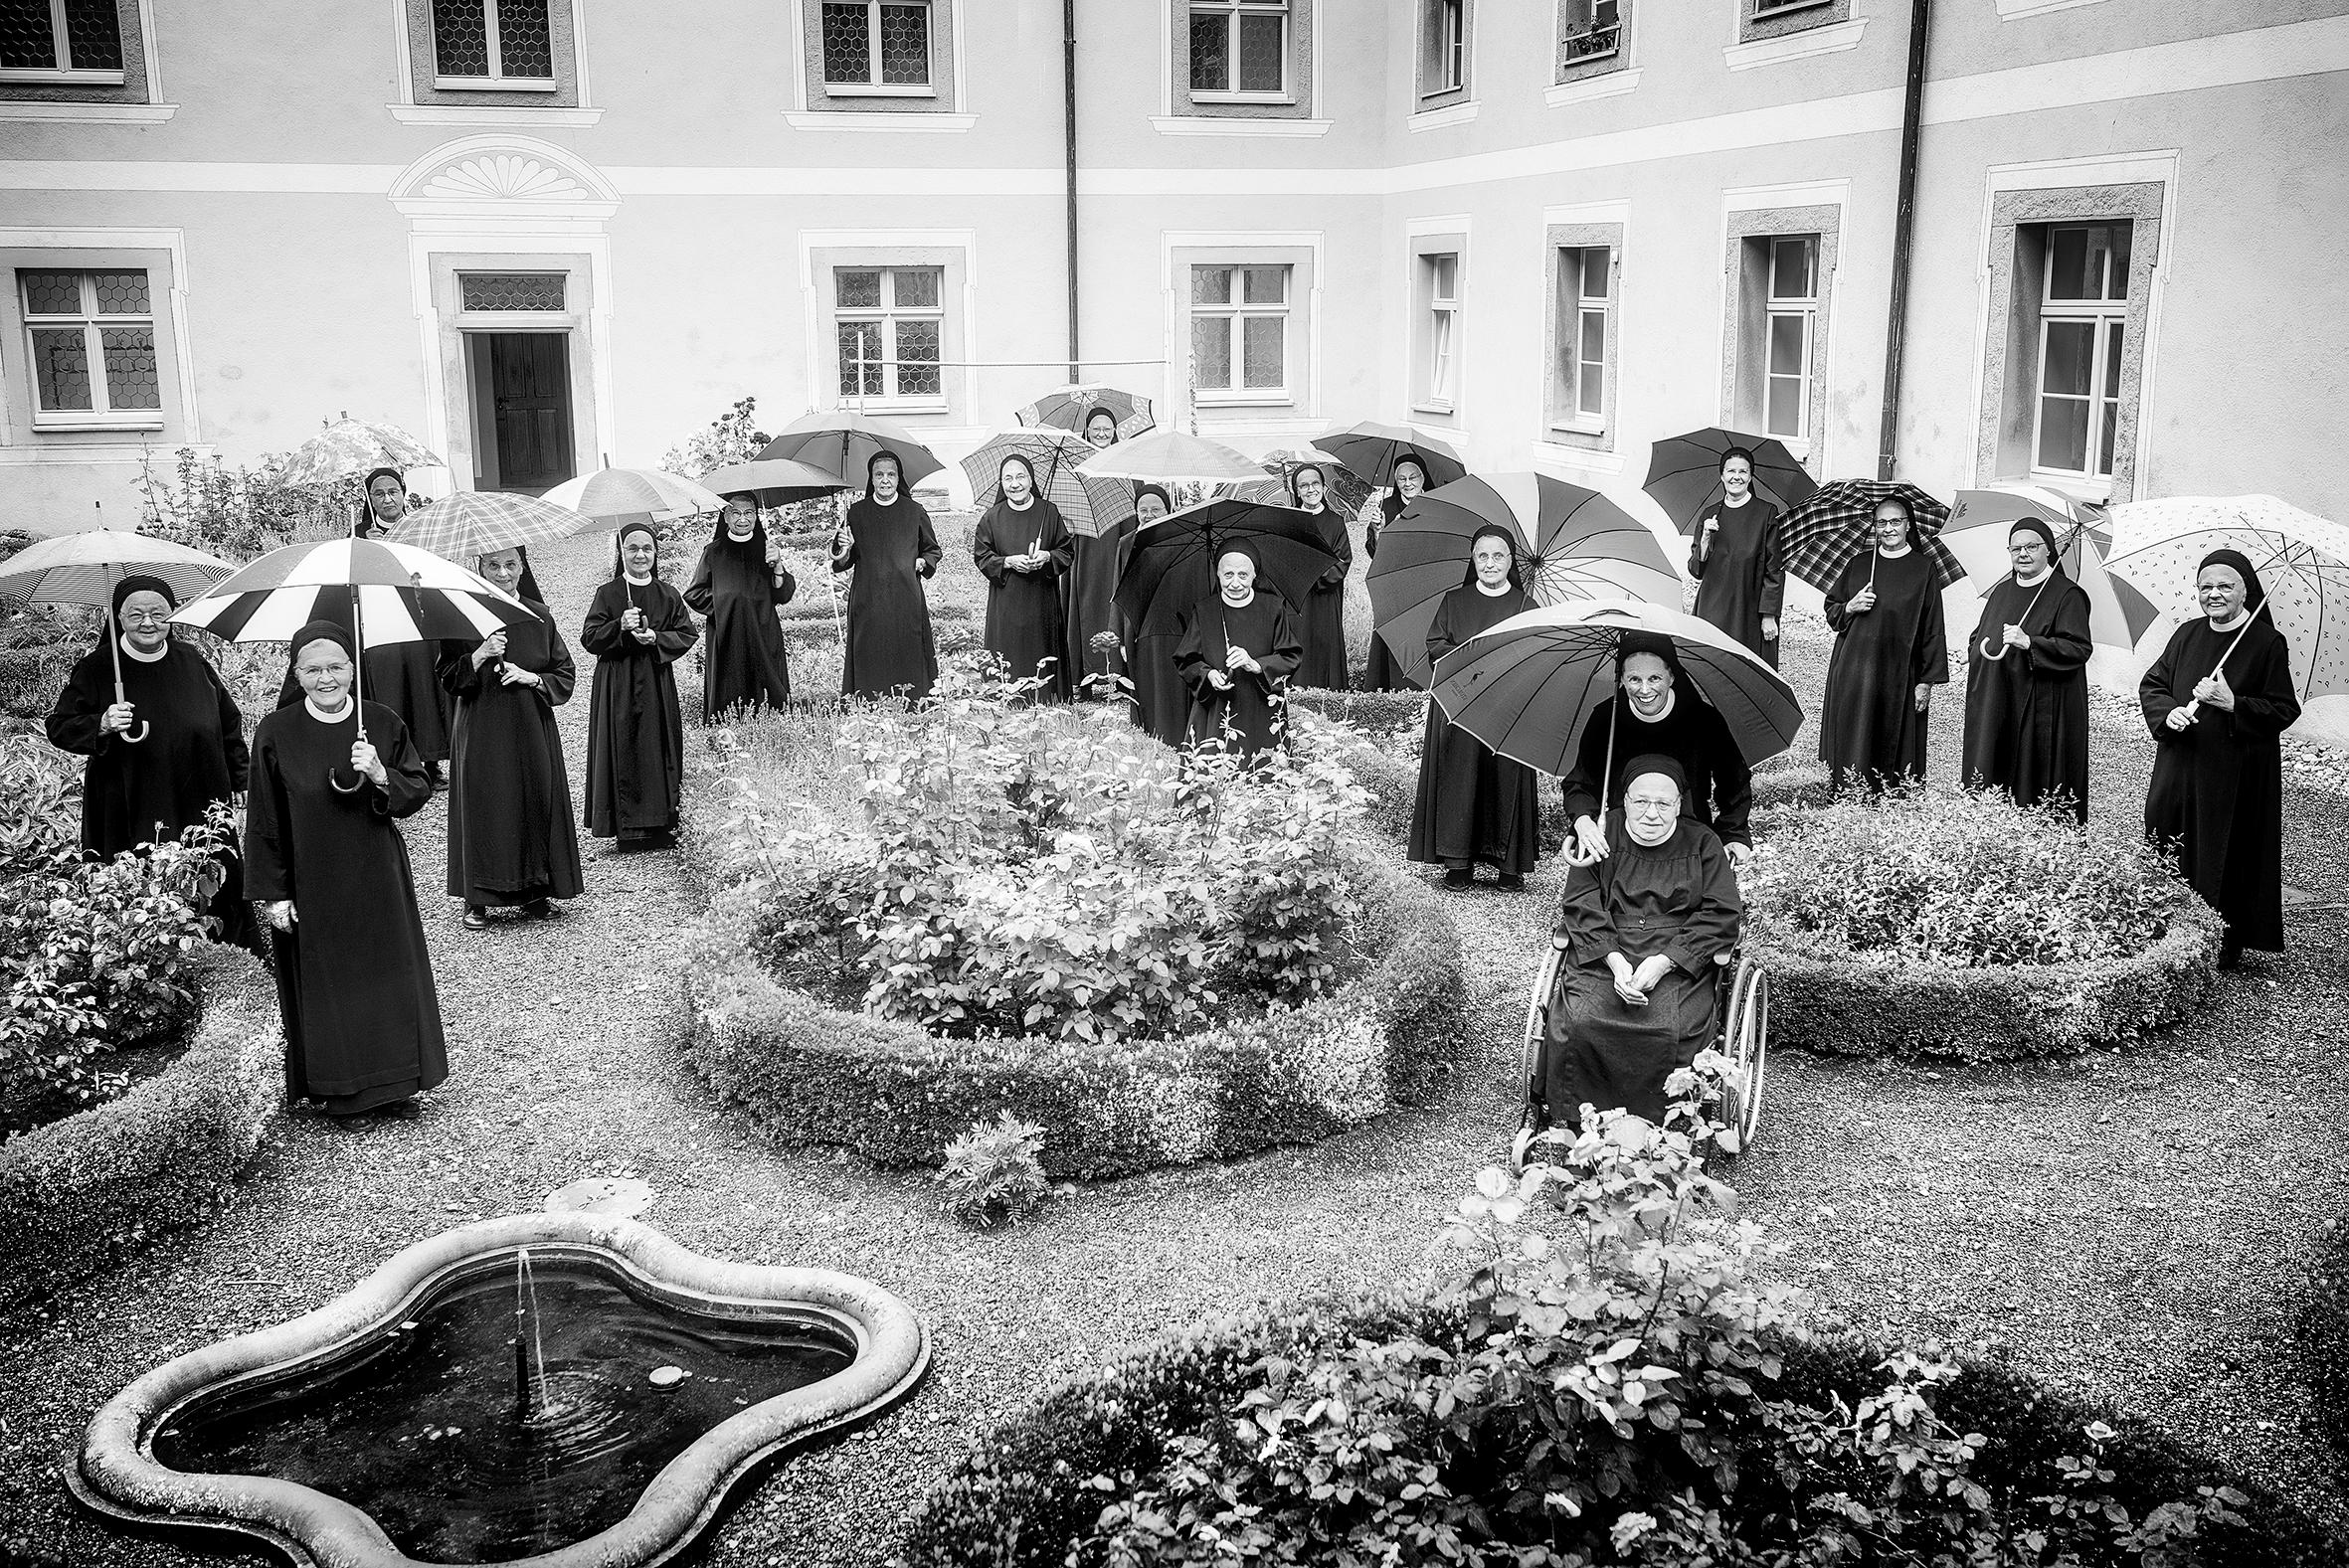 all the nuns in the convent s courtyard with umbrellas